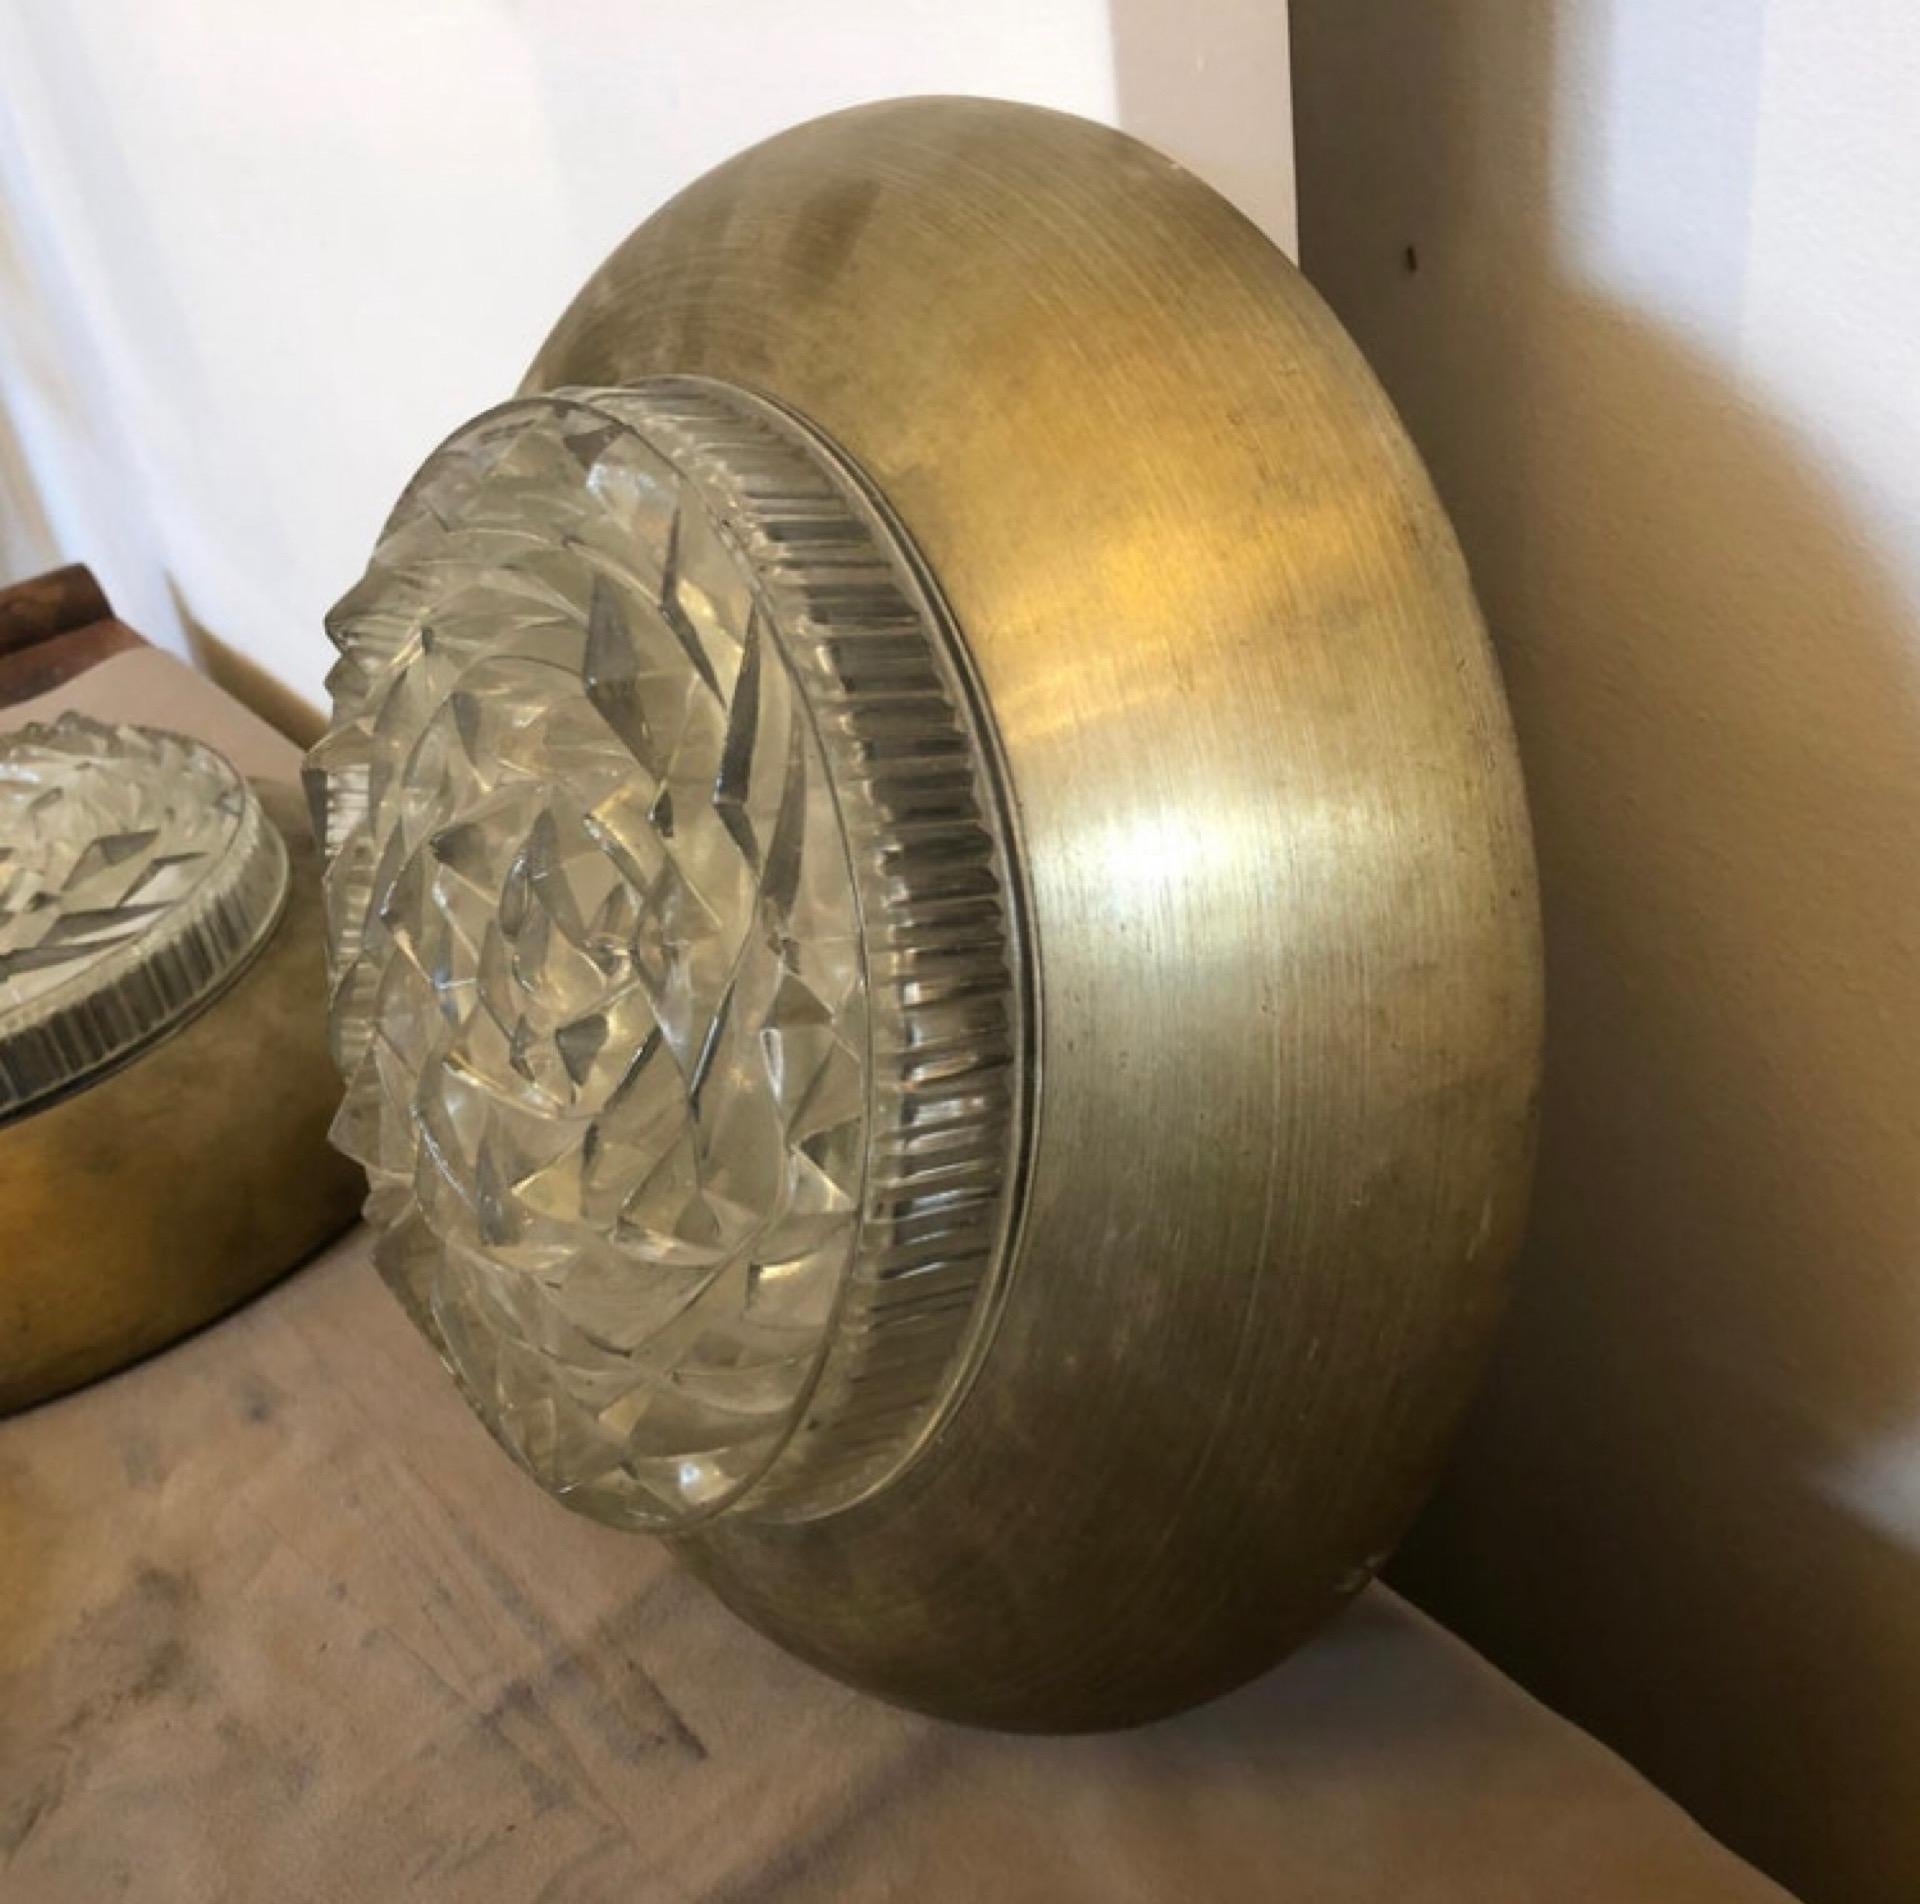 A pair of labeled Stilux wall sconces made in Italy in the 1970s, all in original patina, they work 110-240 volts and need regular e27 bulbs, also usable as ceiling light.